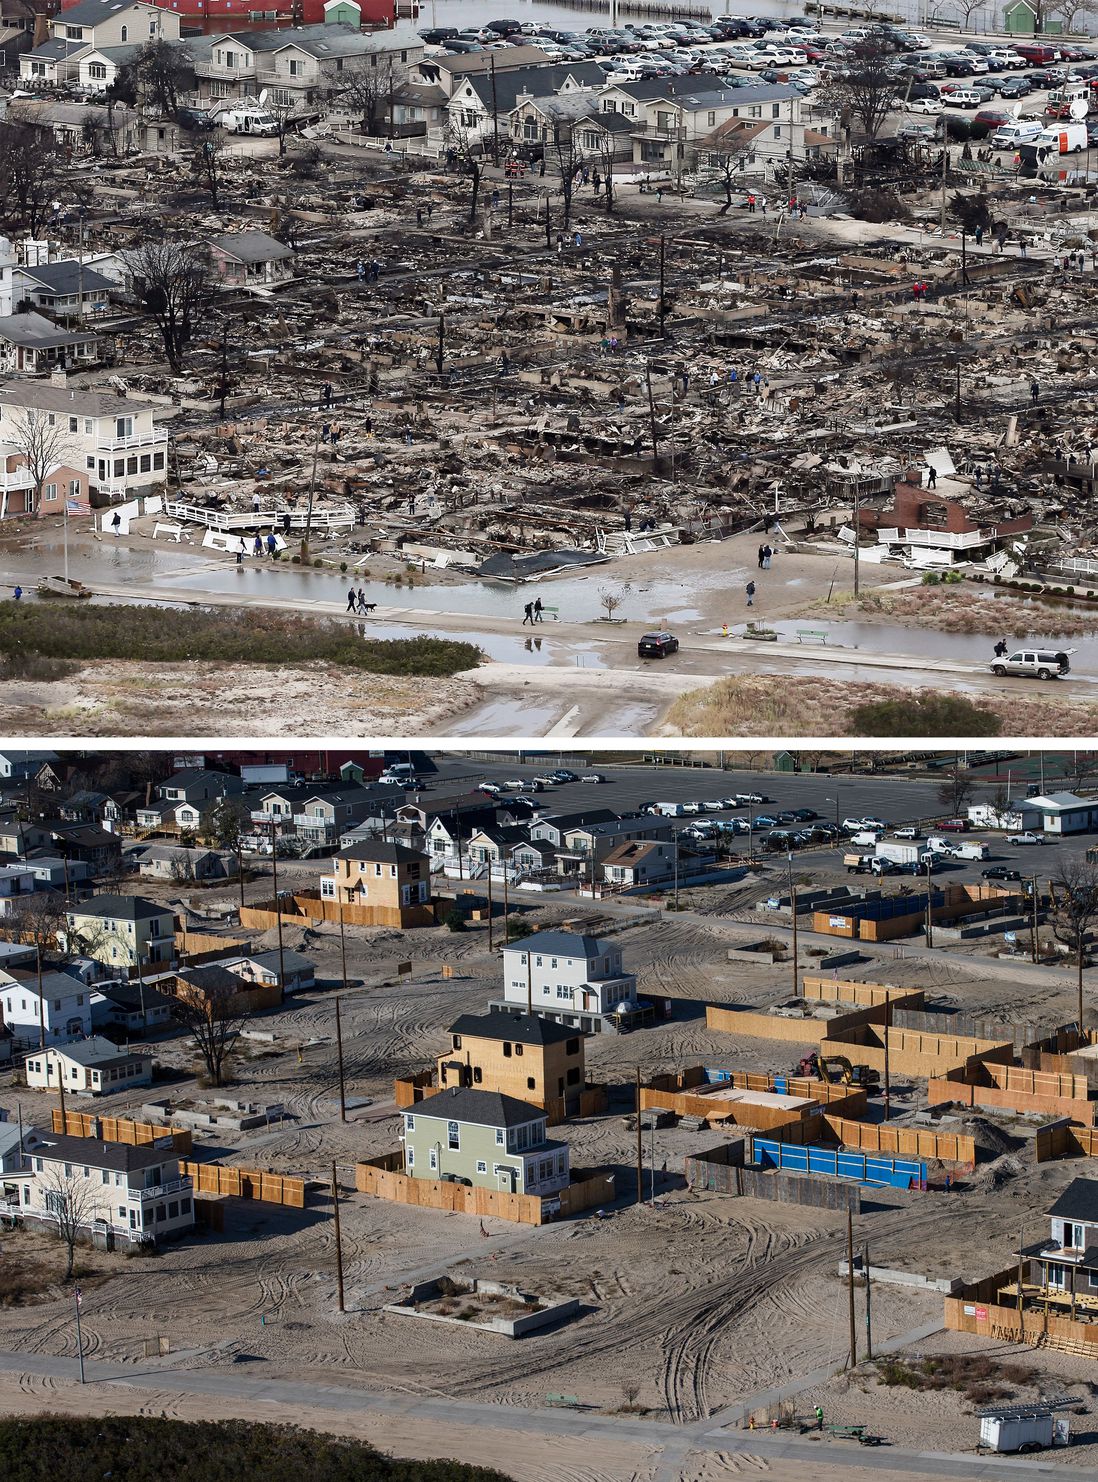 [Top] The remains of burned homes are surrounded by water due to Superstorm Sandy in the Breezy Point neighborhood of the Queens borough of New York City October 31, 2012. [Bottom] Newly built homes and vacant lots are shown in the Breezy Point neighborhood of the Queens borough of New York City October 21, 2013.